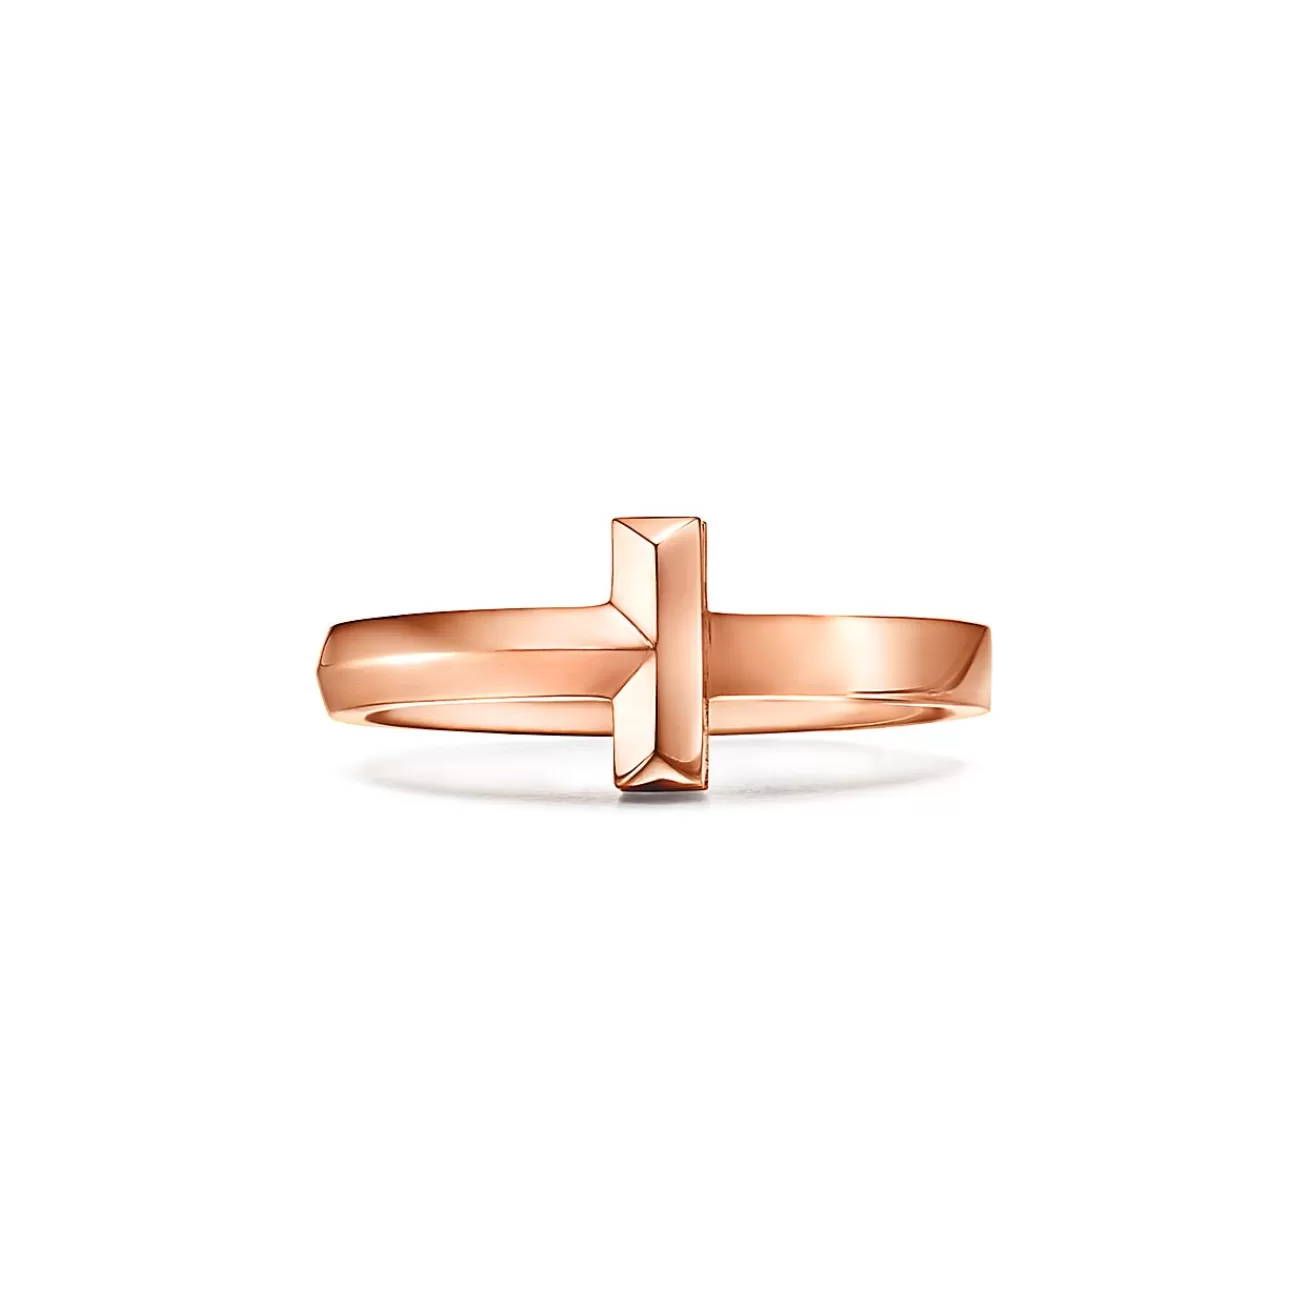 Tiffany & Co. Tiffany T T1 Ring in Rose Gold, 2.5 mm | ^ Rings | Men's Jewelry